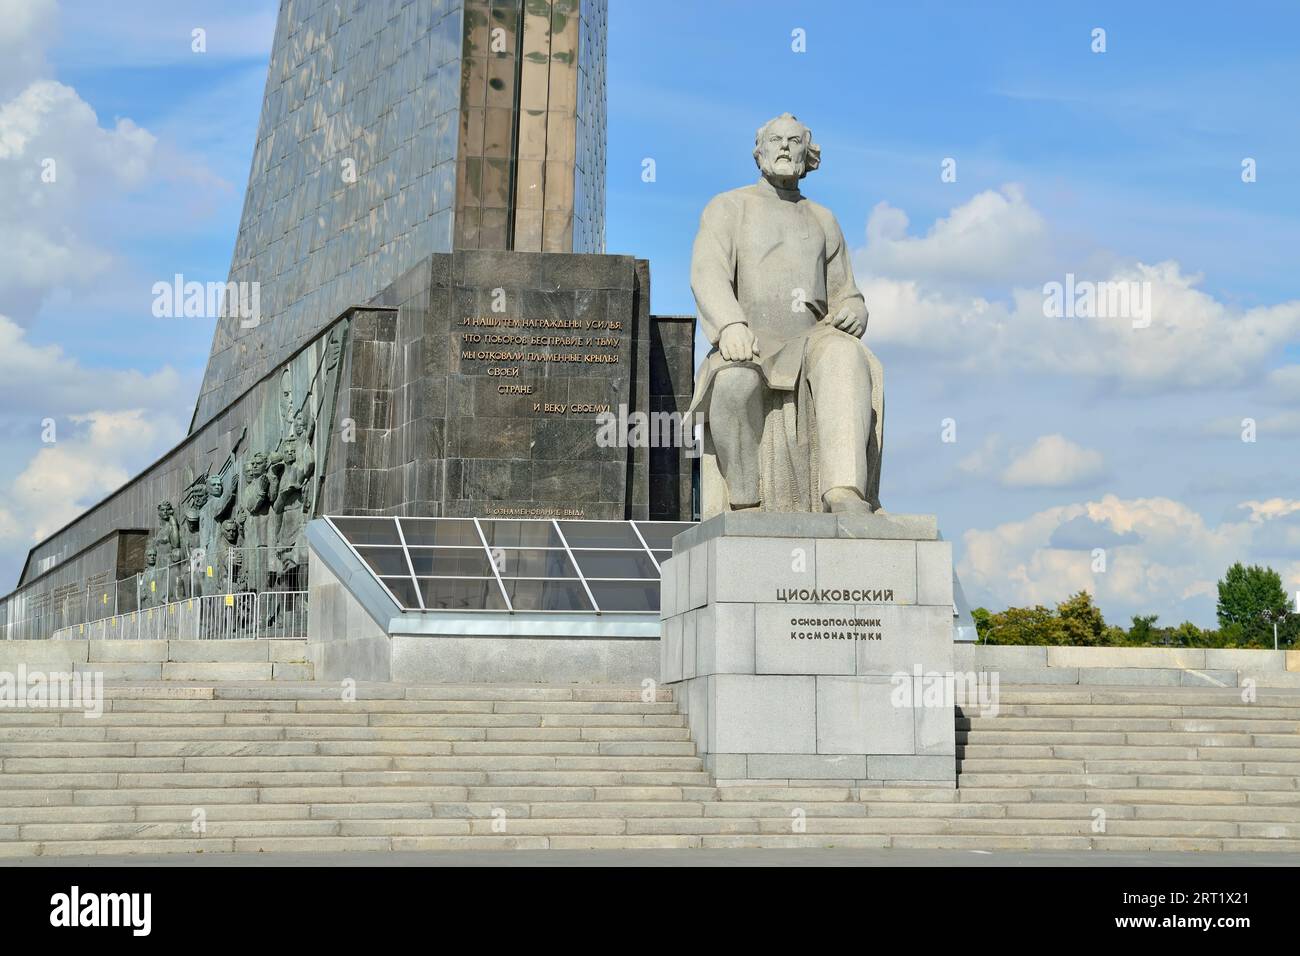 Moscow, Russia, august 25, 2020: Monument to Konstantin Eduardovich Tsiolkovsky, the founder of cosmonautics in the Cosmonautics Museum. Moscow Stock Photo